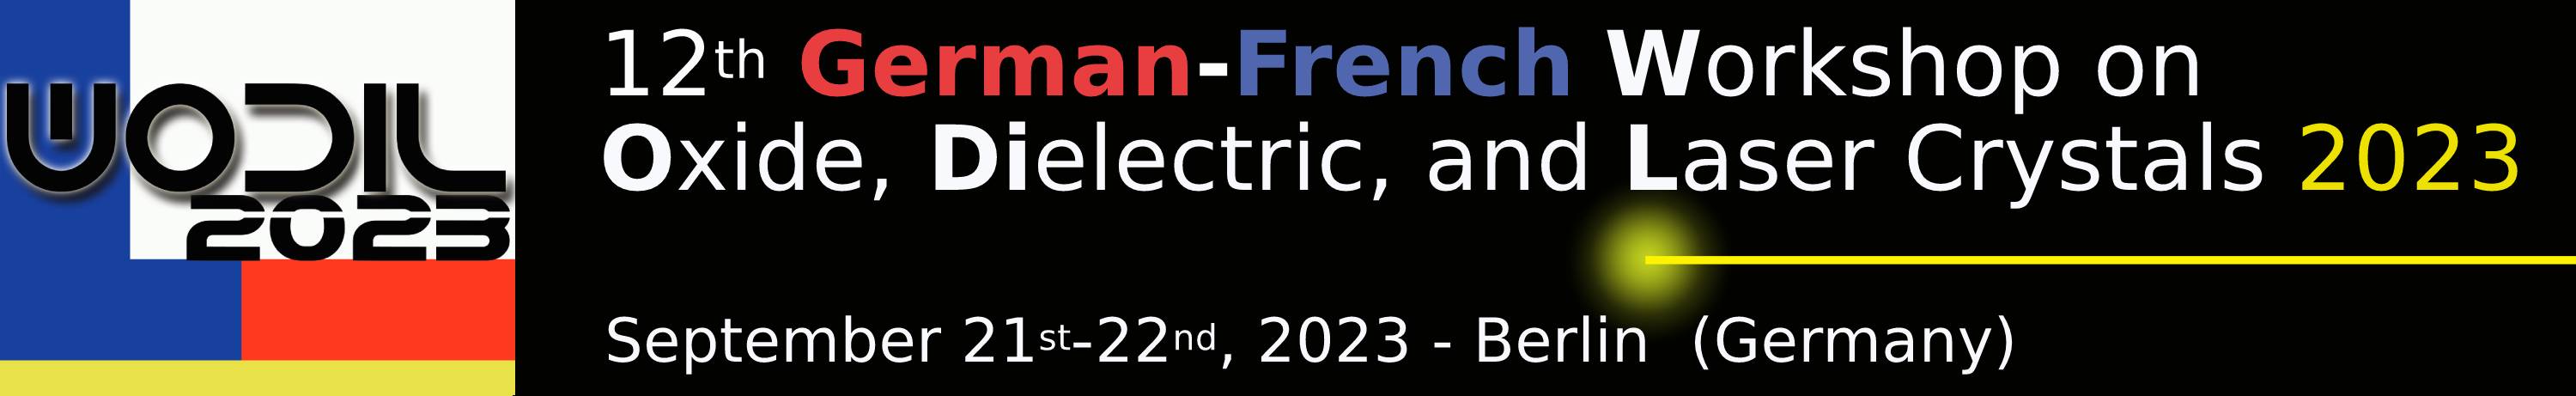 Banner:	12th German-French Workshop on Oxide, Dielectric and Laser single crystals (WODIL 2023), Sept. 21-22, 2023 in Berlin